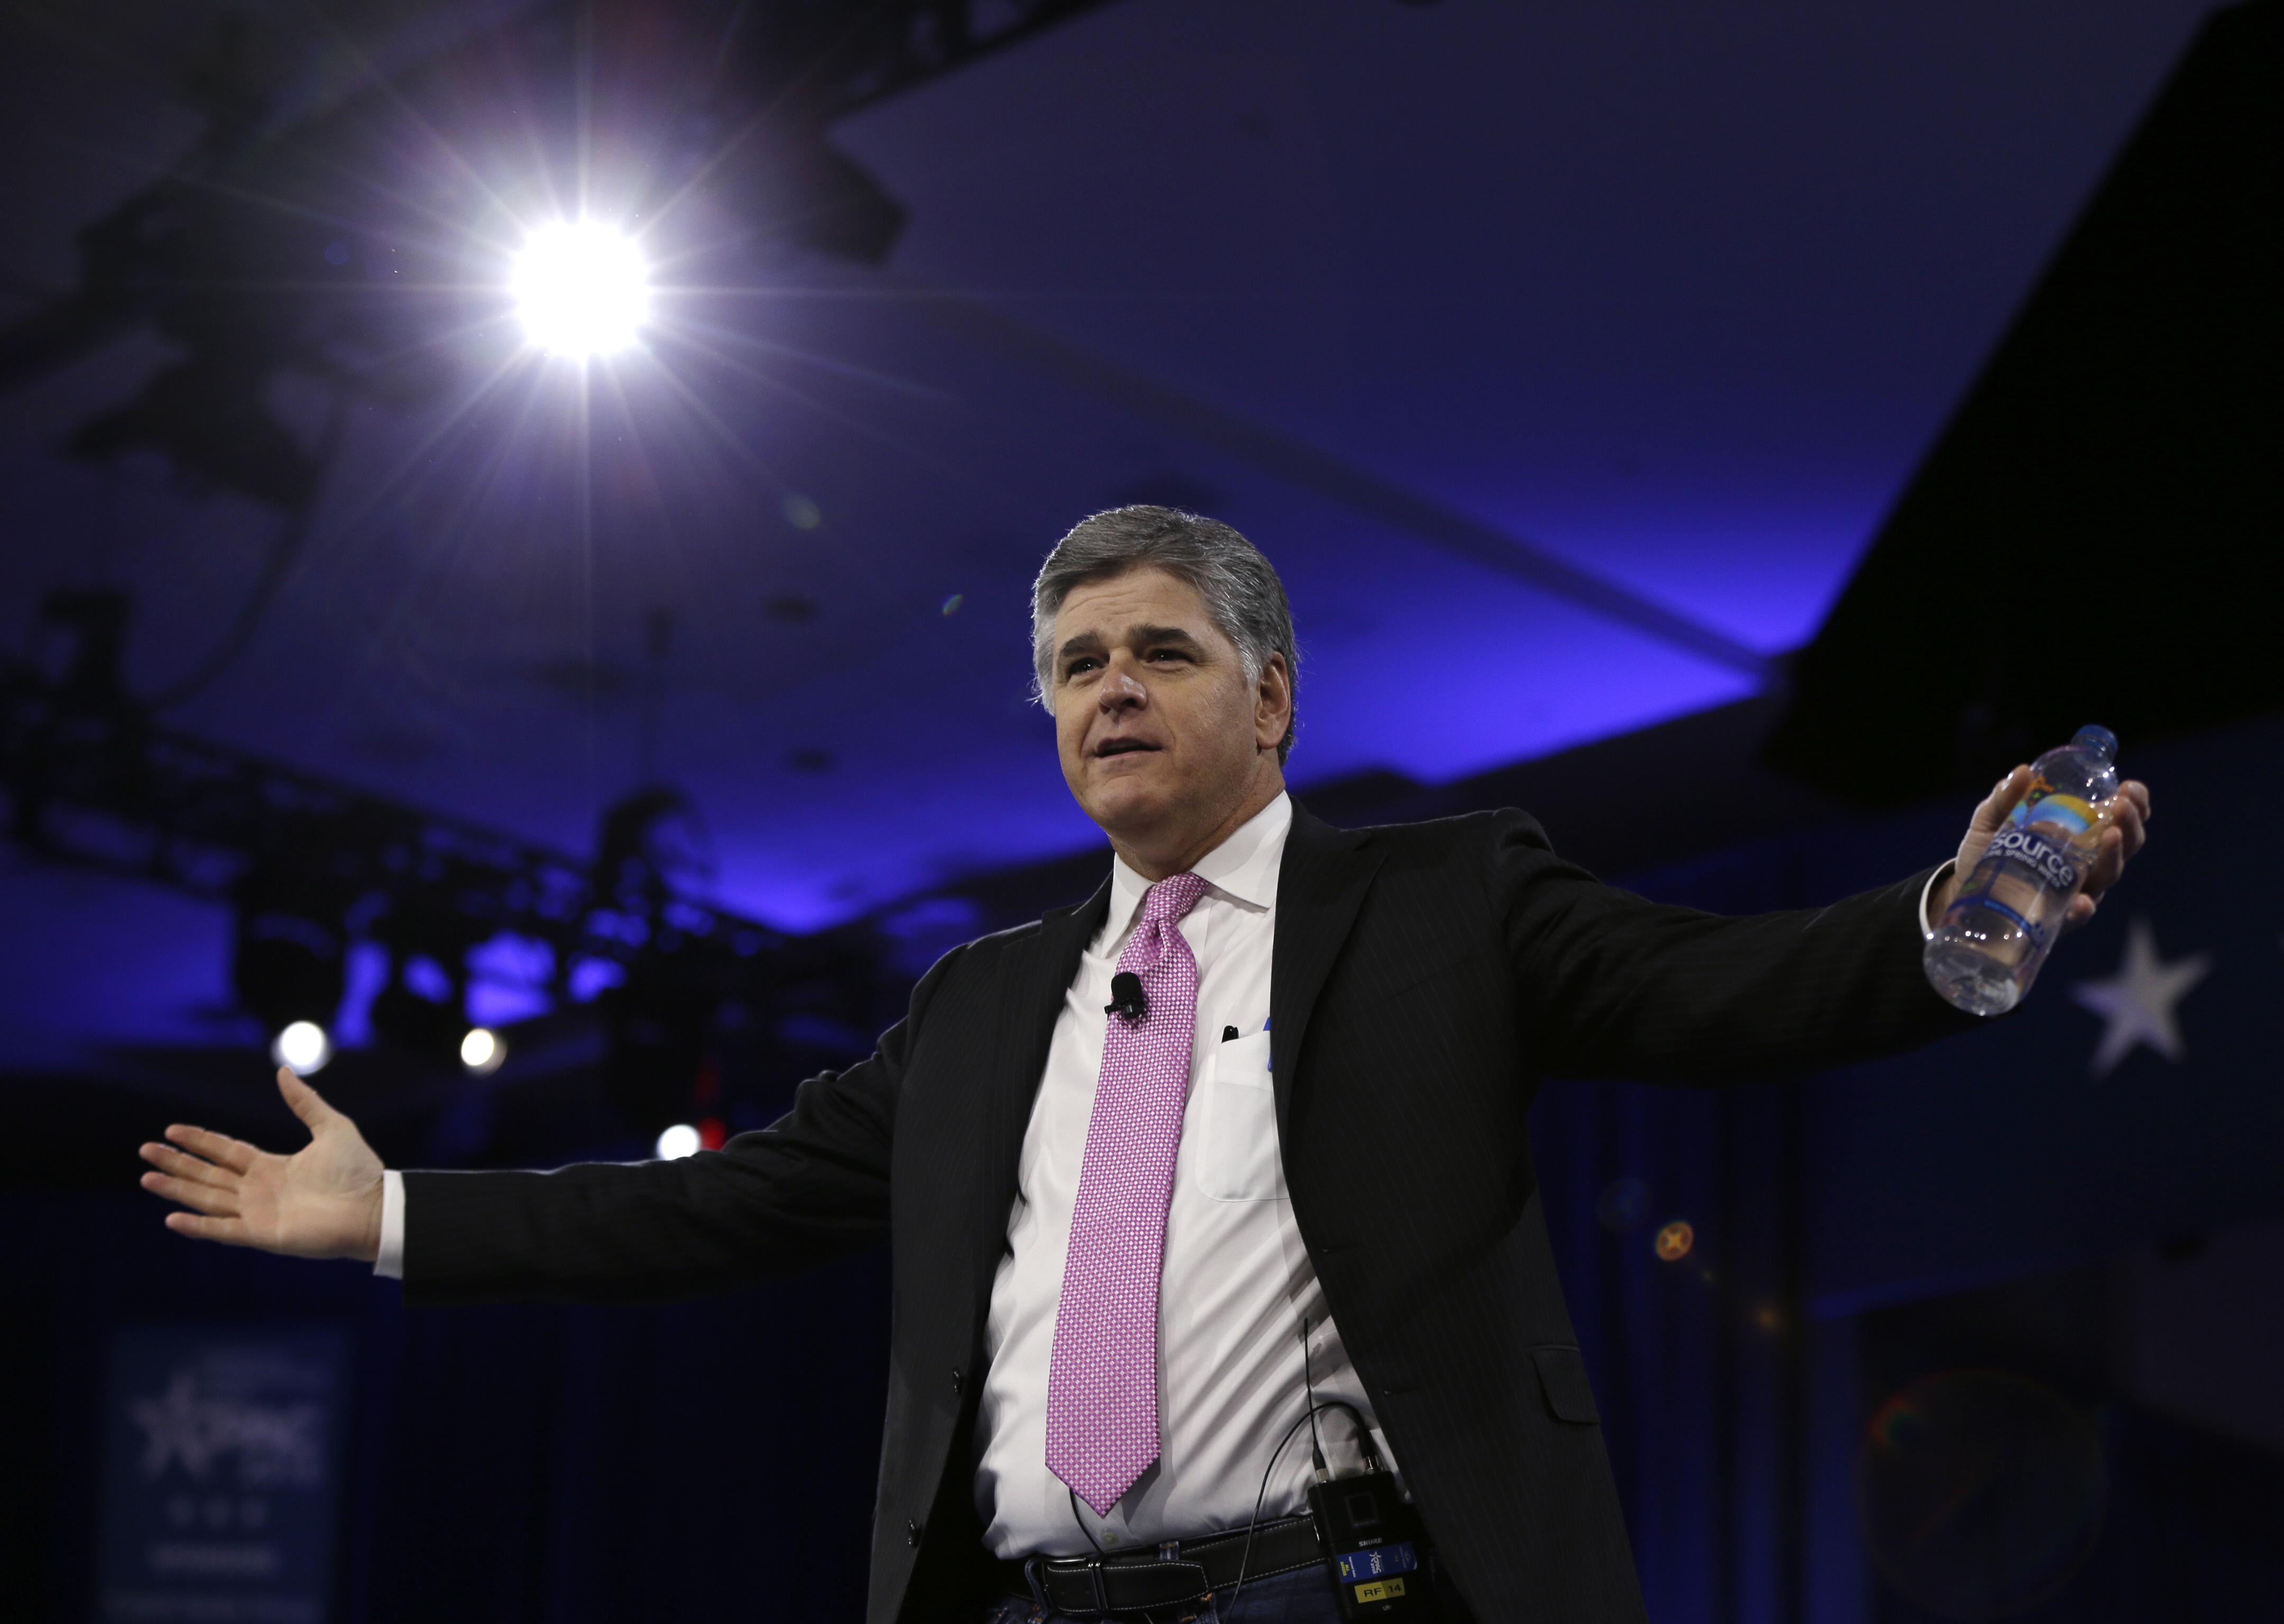 Sean Hannity does victory lap after Donald Trump victory: 'Get Juan Williams off that ledge' - Washington Times